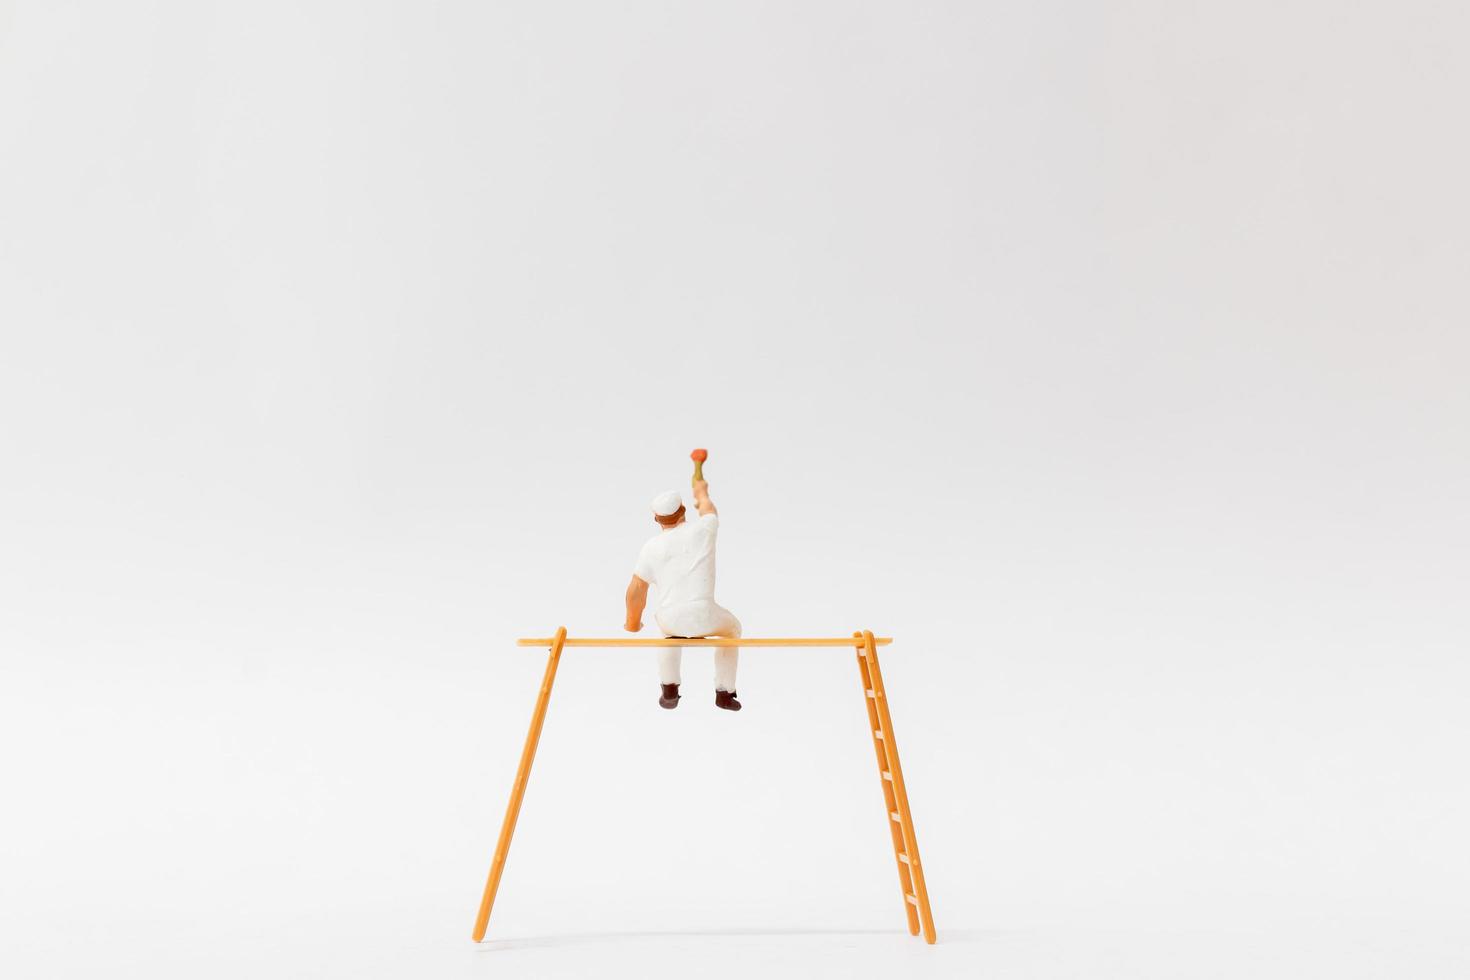 Miniature painter holding a brush on a white background photo